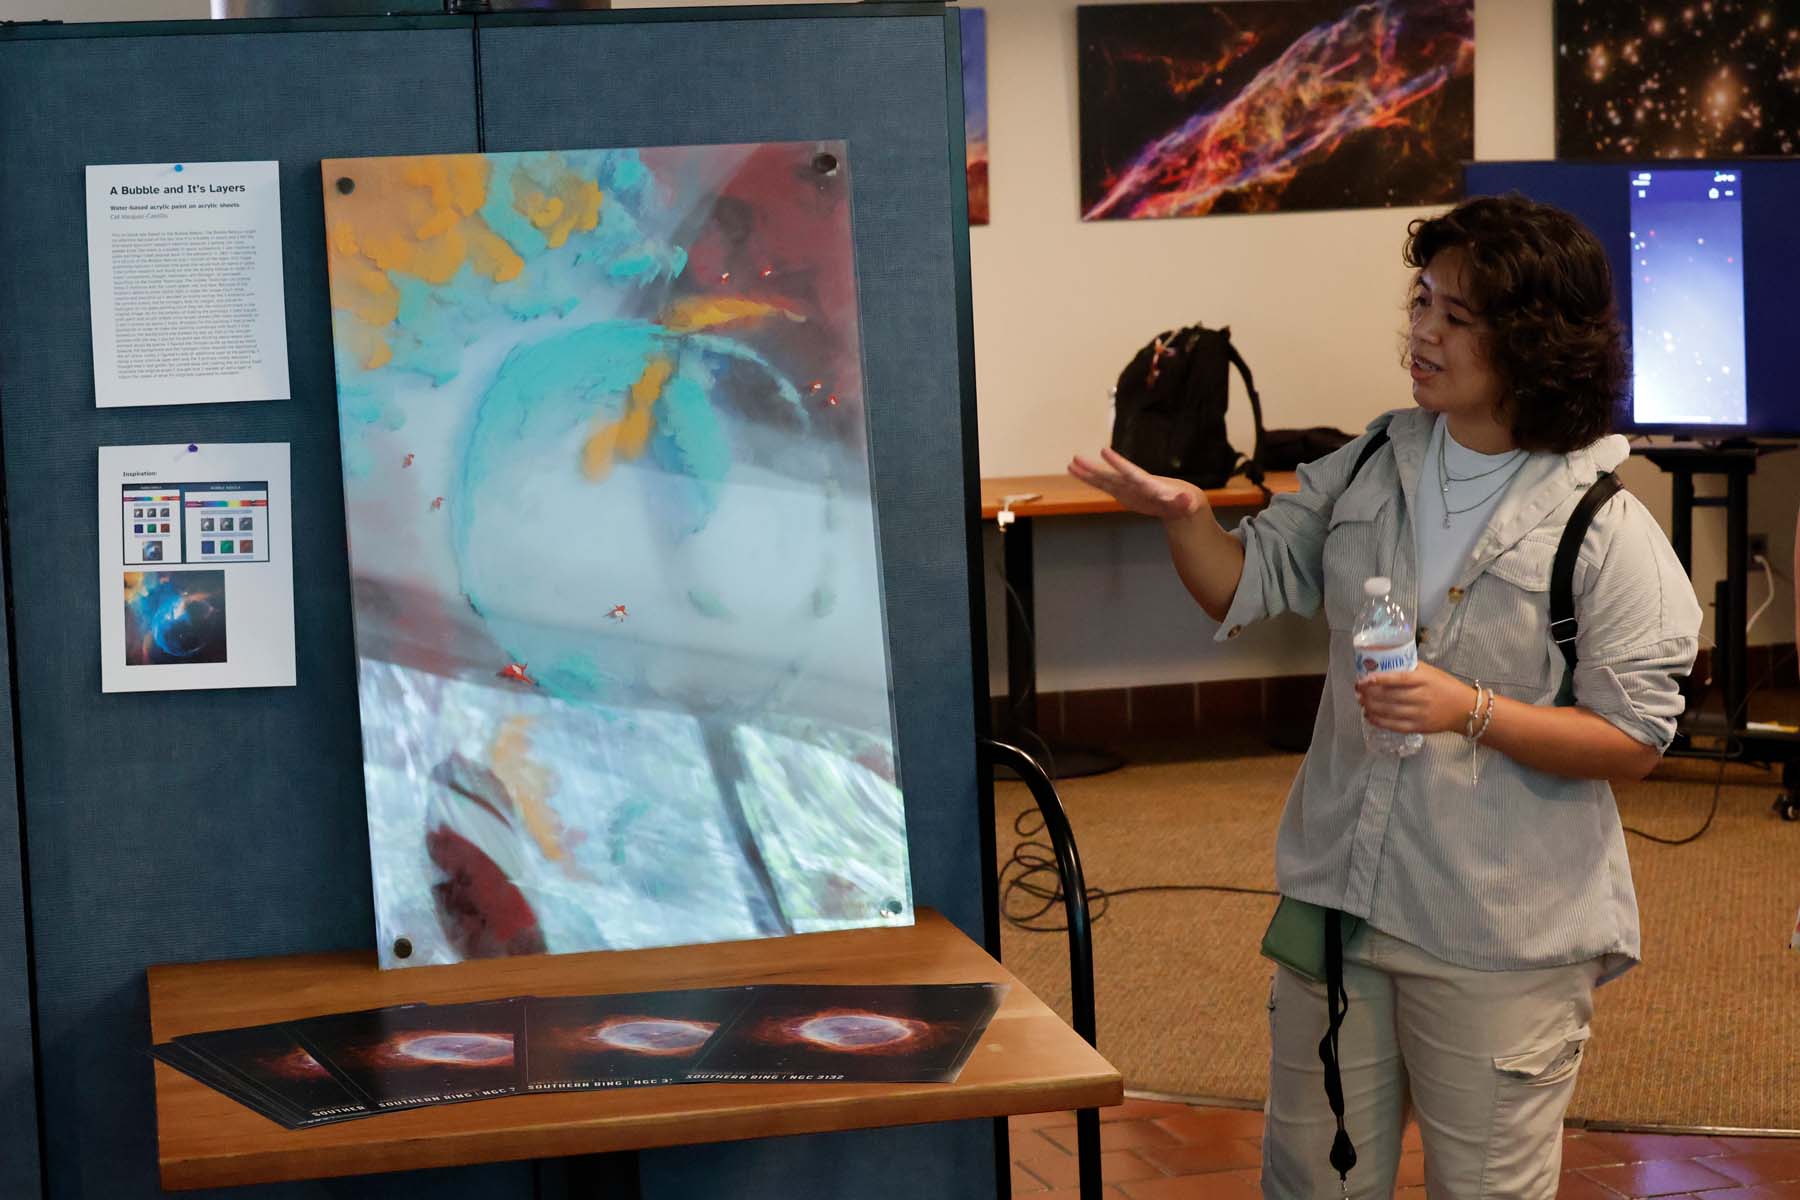 A student, caught mid-explanation, shows off a painted bubble nebula; the piece is layered plexiglass that has been painted and stacked to give it a textured look.